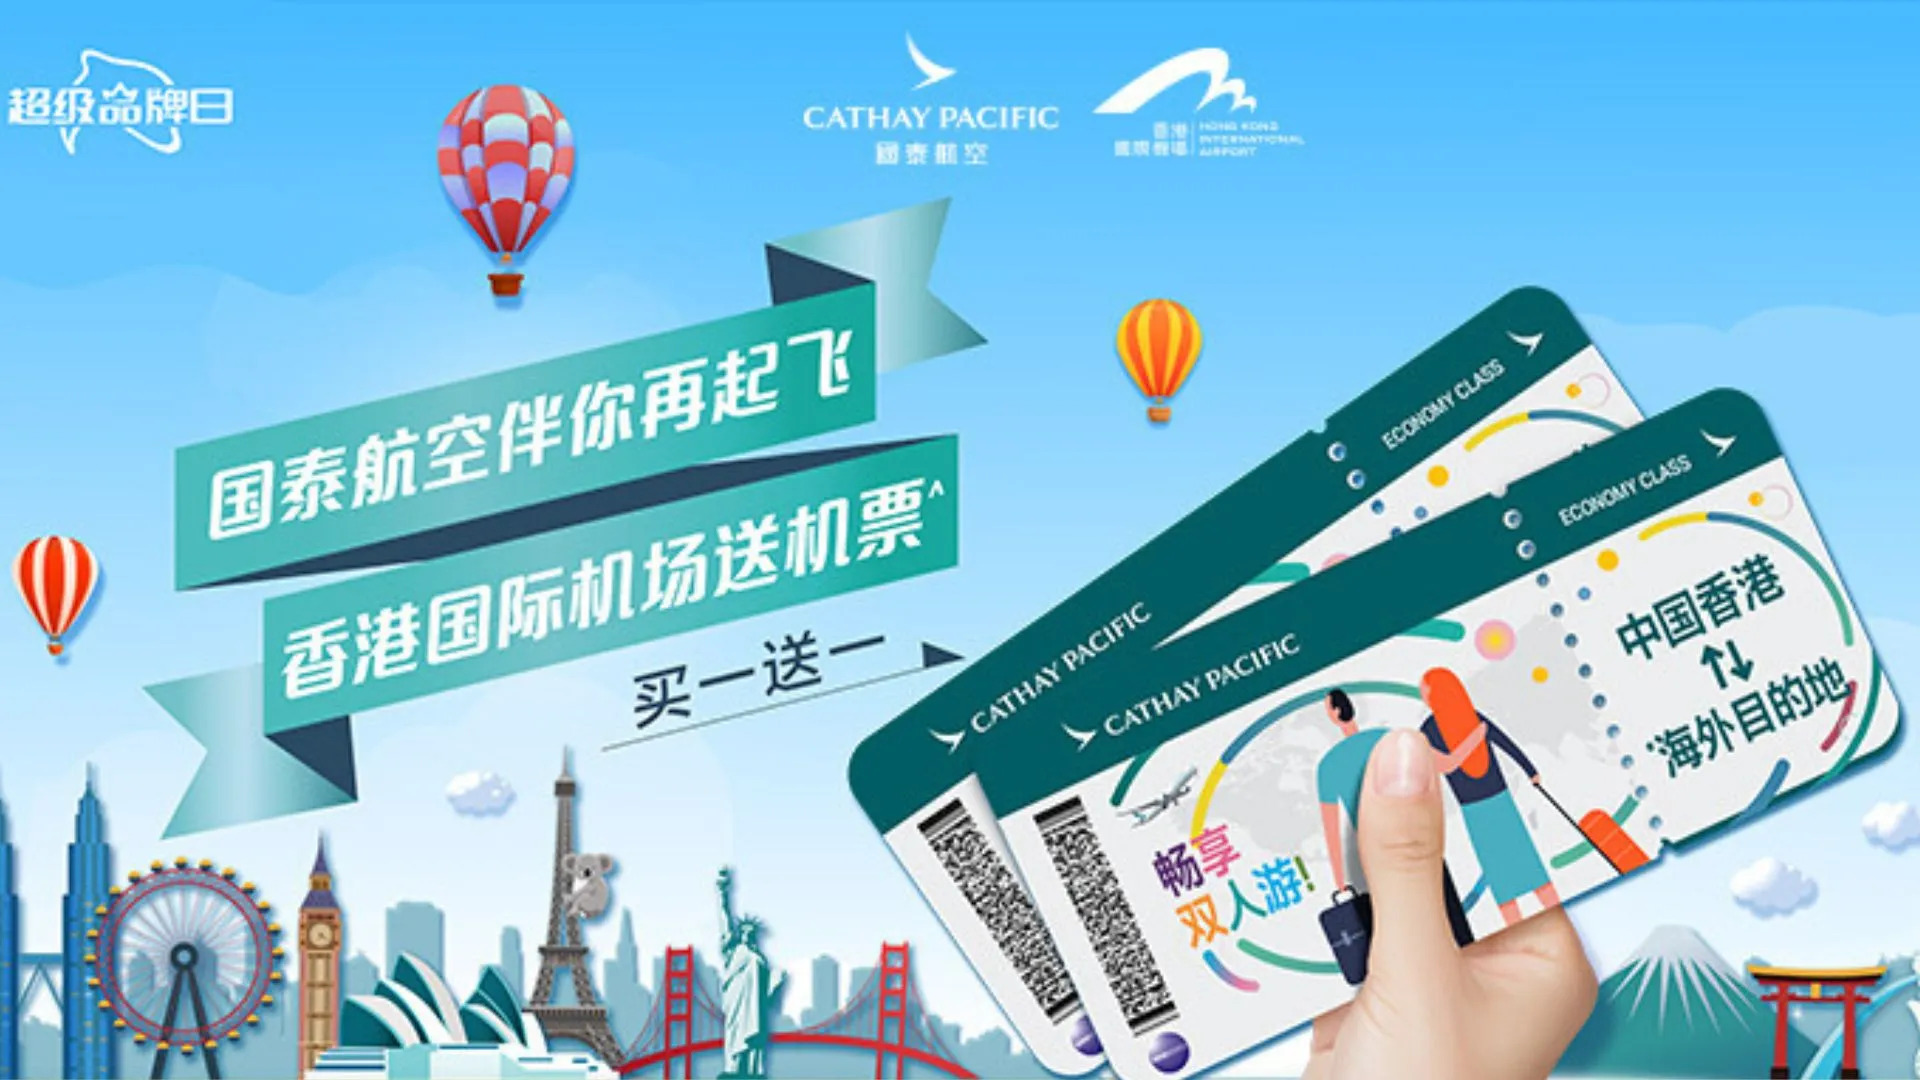 cathay pacific buy-1-get-1-free offer